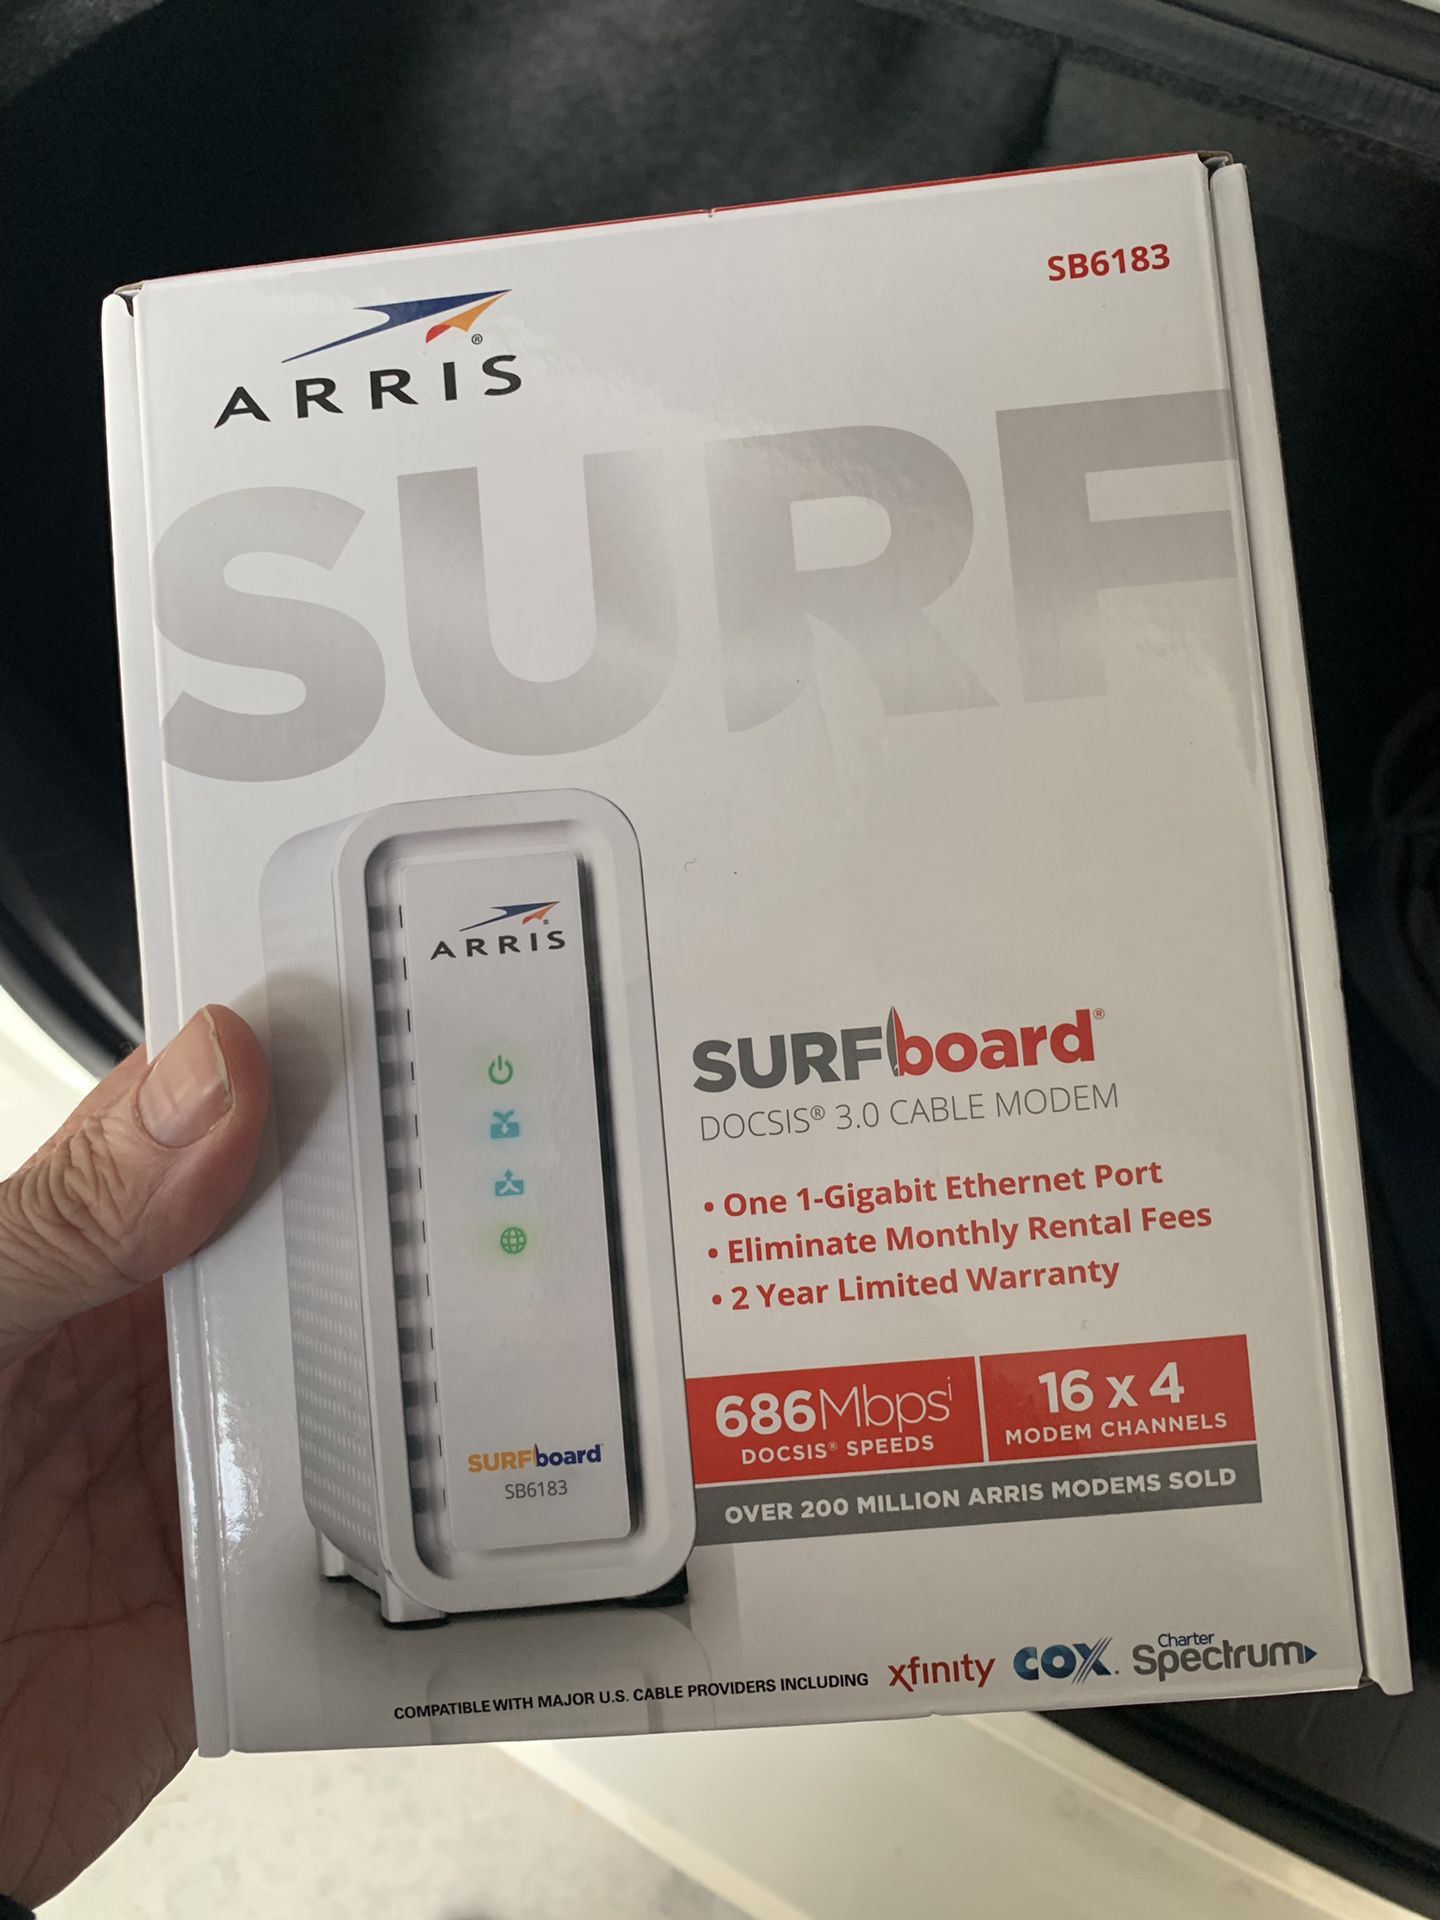 ARRIS SURFboard (16x4) DOCSIS 3.0 Cable Modem, 686 Mbps Max Speed, Certified for Comcast Xfinity, Spectrum, Cox, Cablevision & more (SB6183 White)